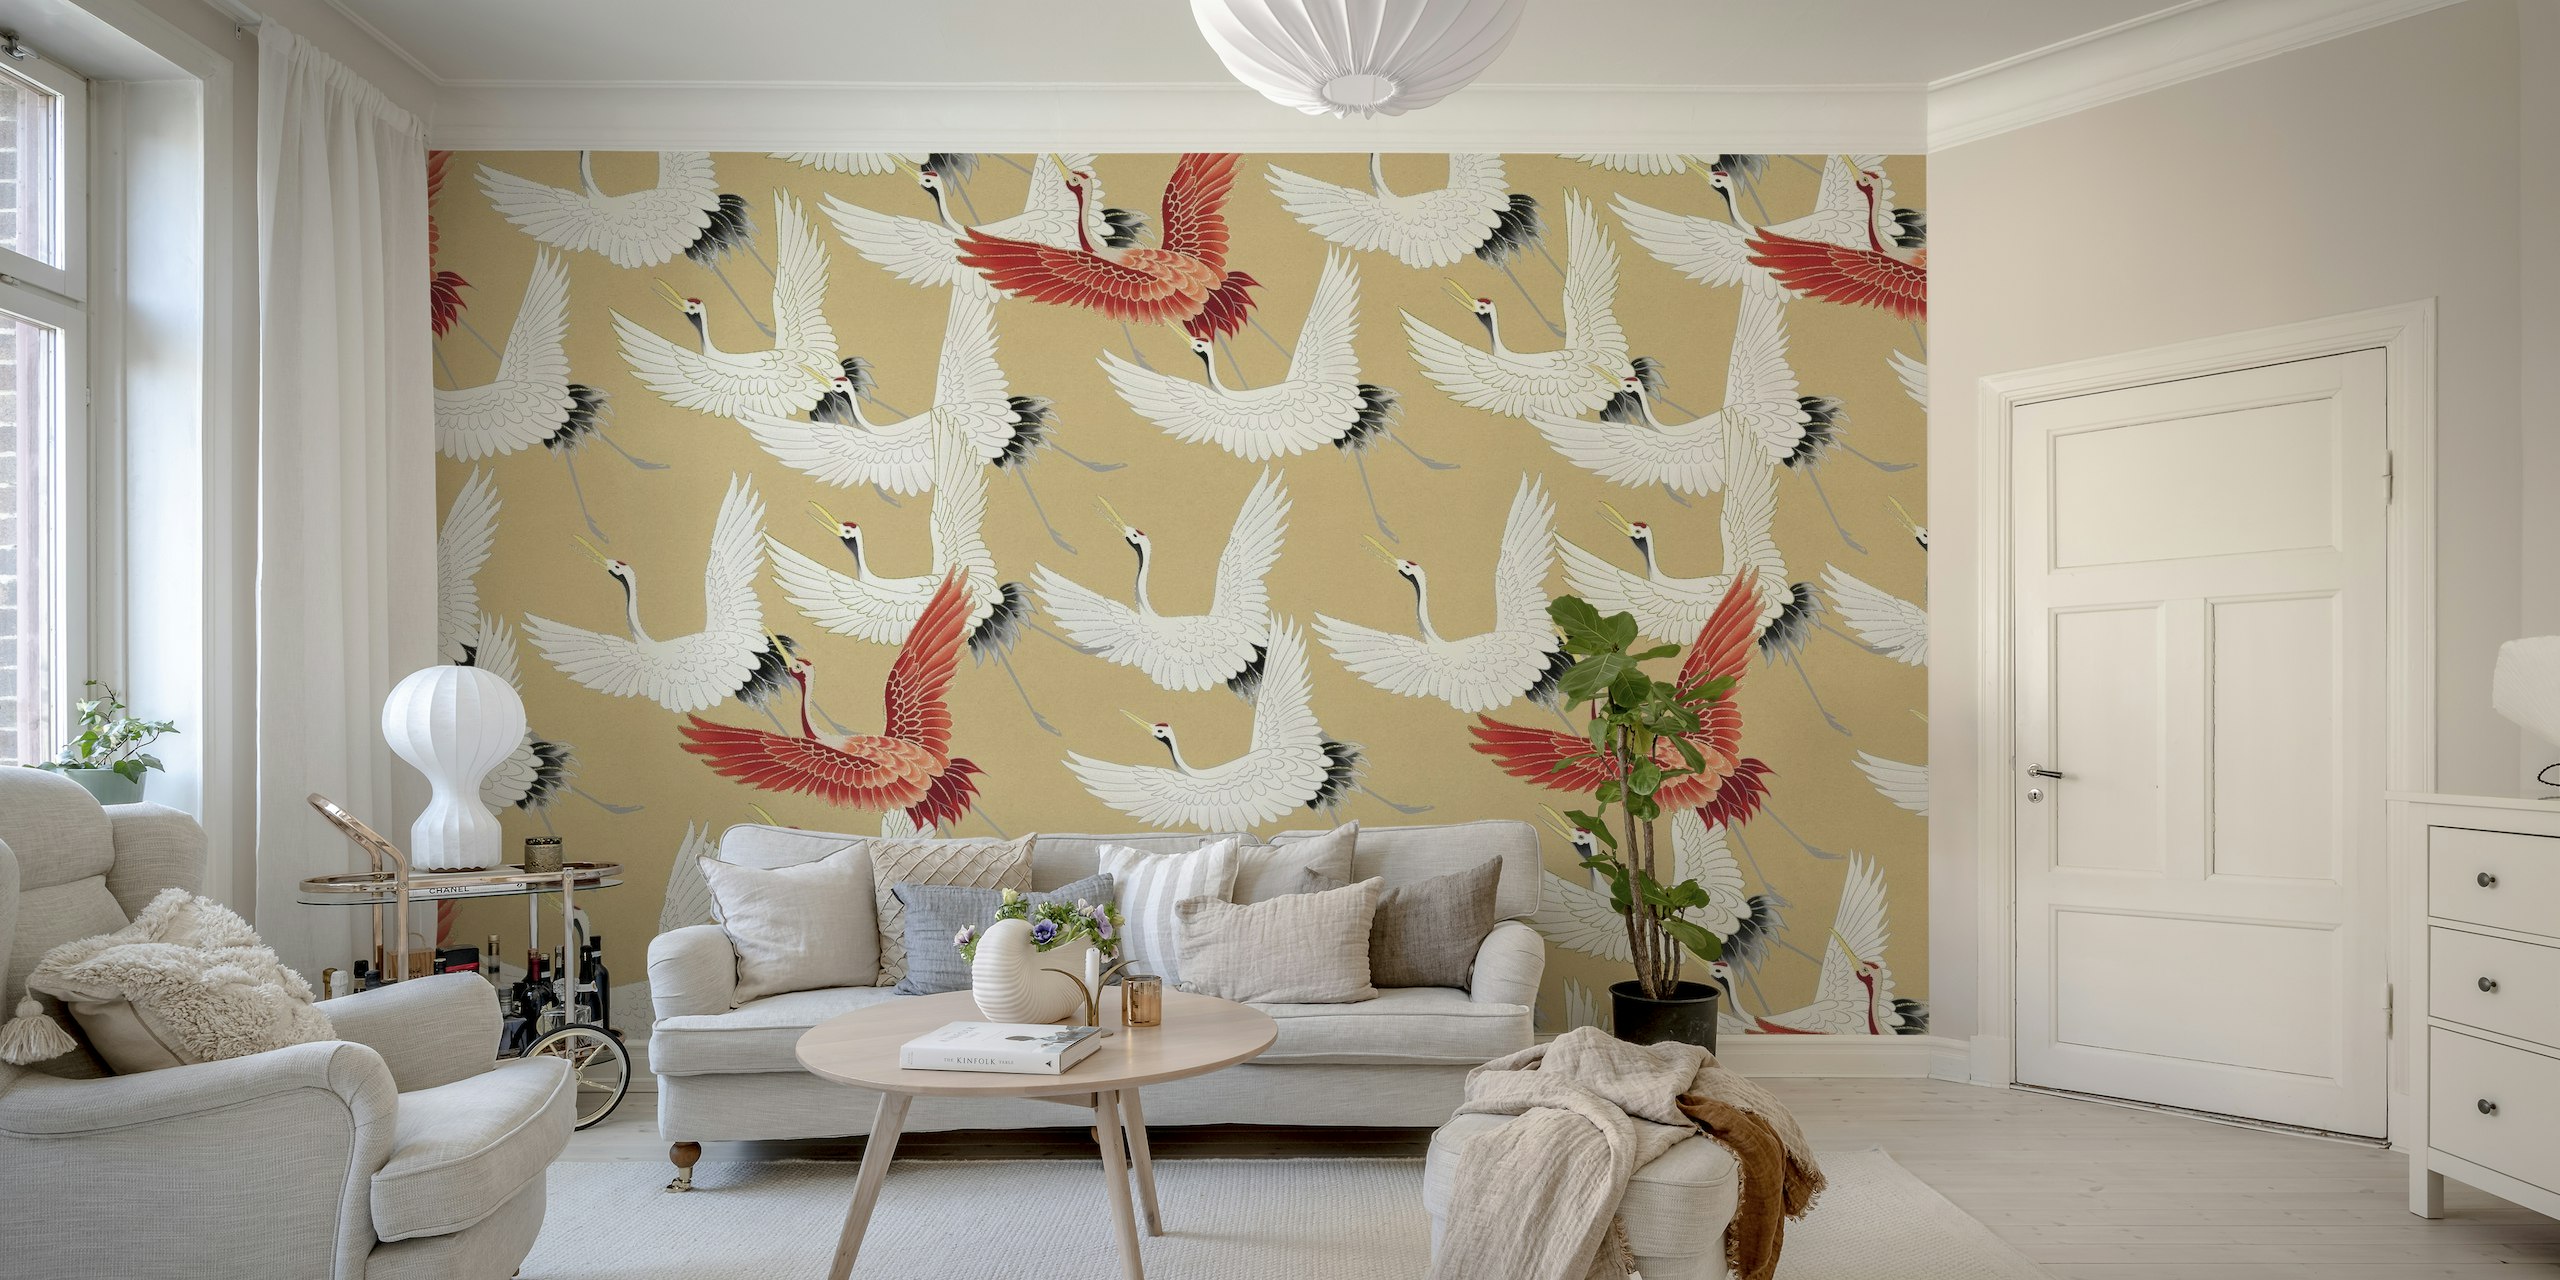 Japanese Cranes 5 wall mural with flying birds on beige background